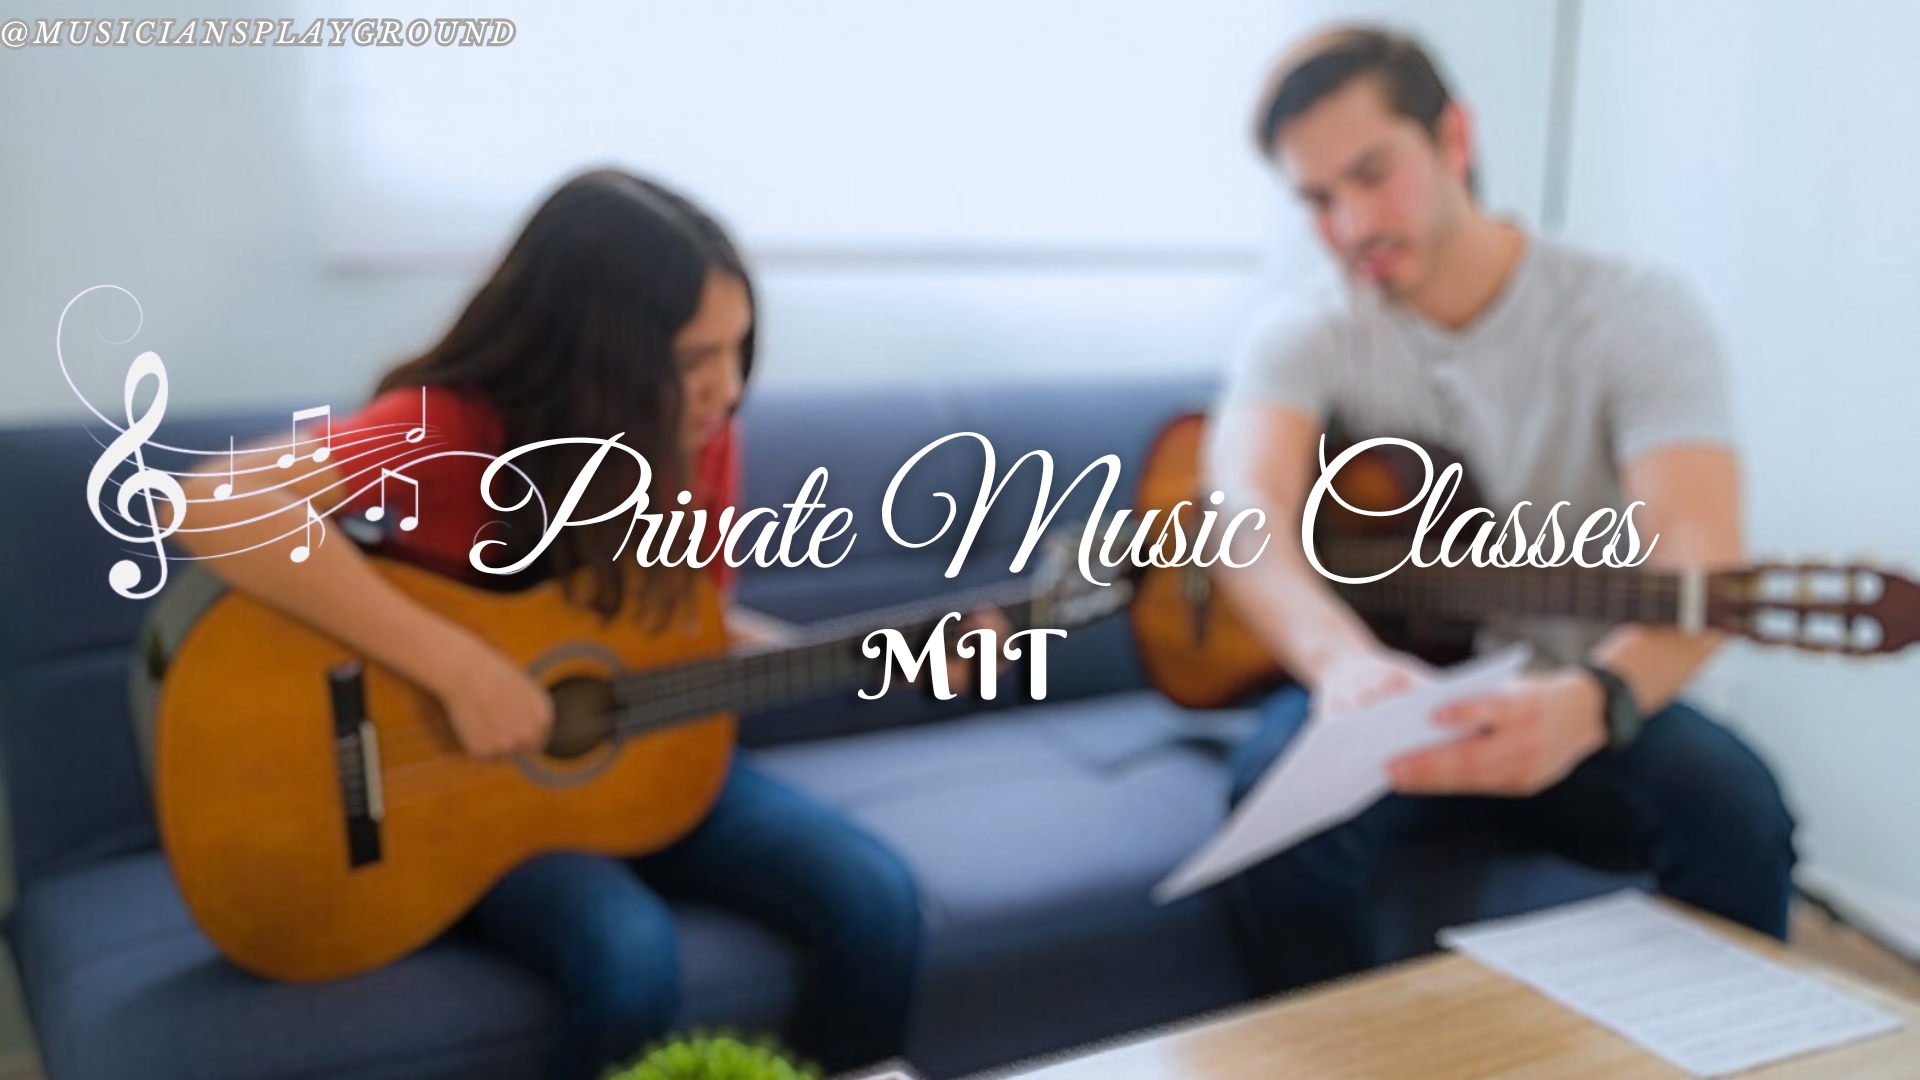 Private Music Lessons in MIT, Massachusetts: Enhance Your Musical Journey at Musicians Playground